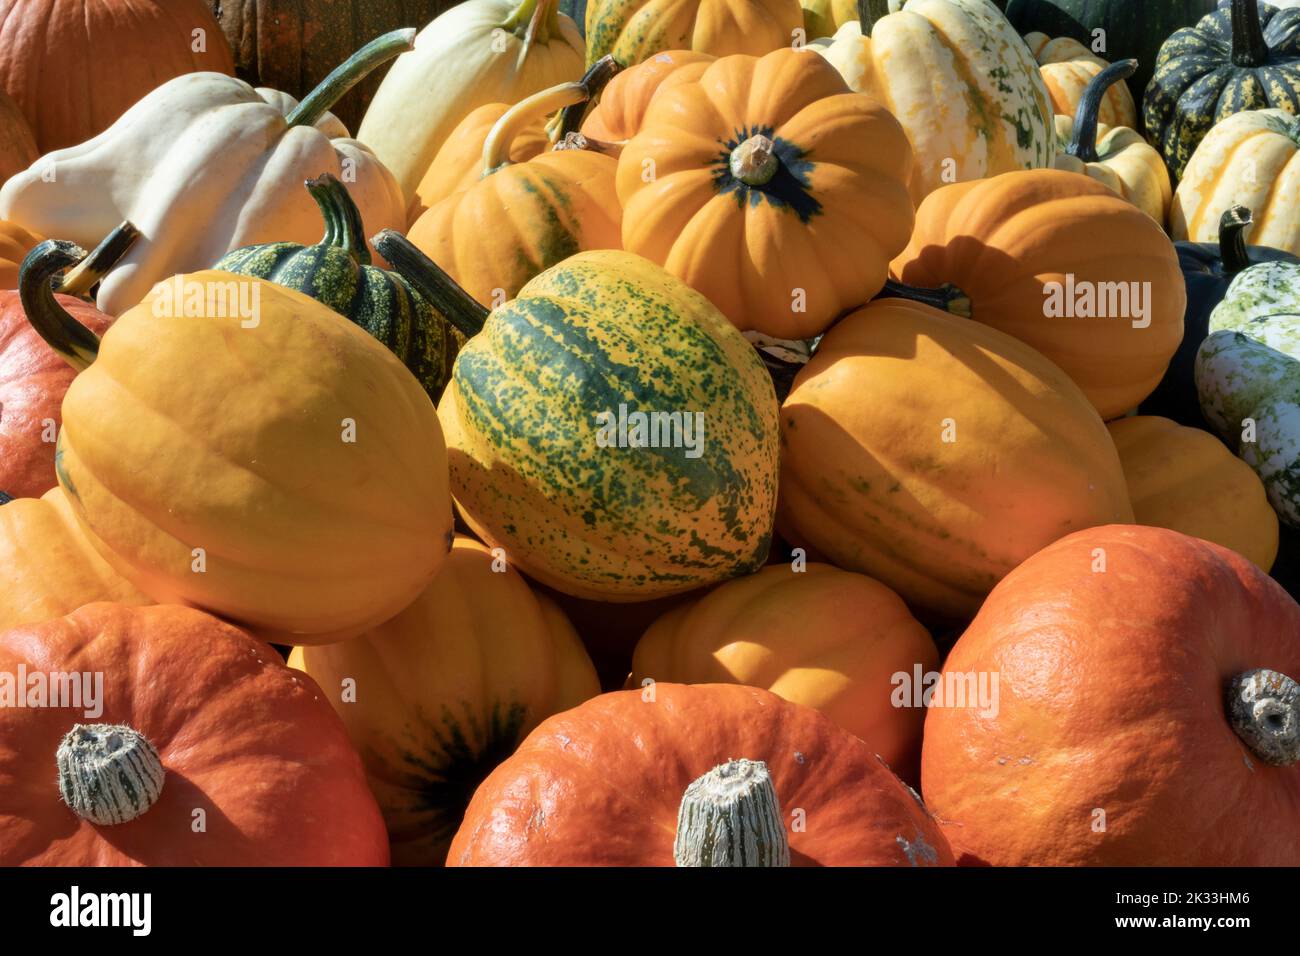 Variation of fresh whole halloween pumpkins close up outdoors in autumn sunlight Stock Photo